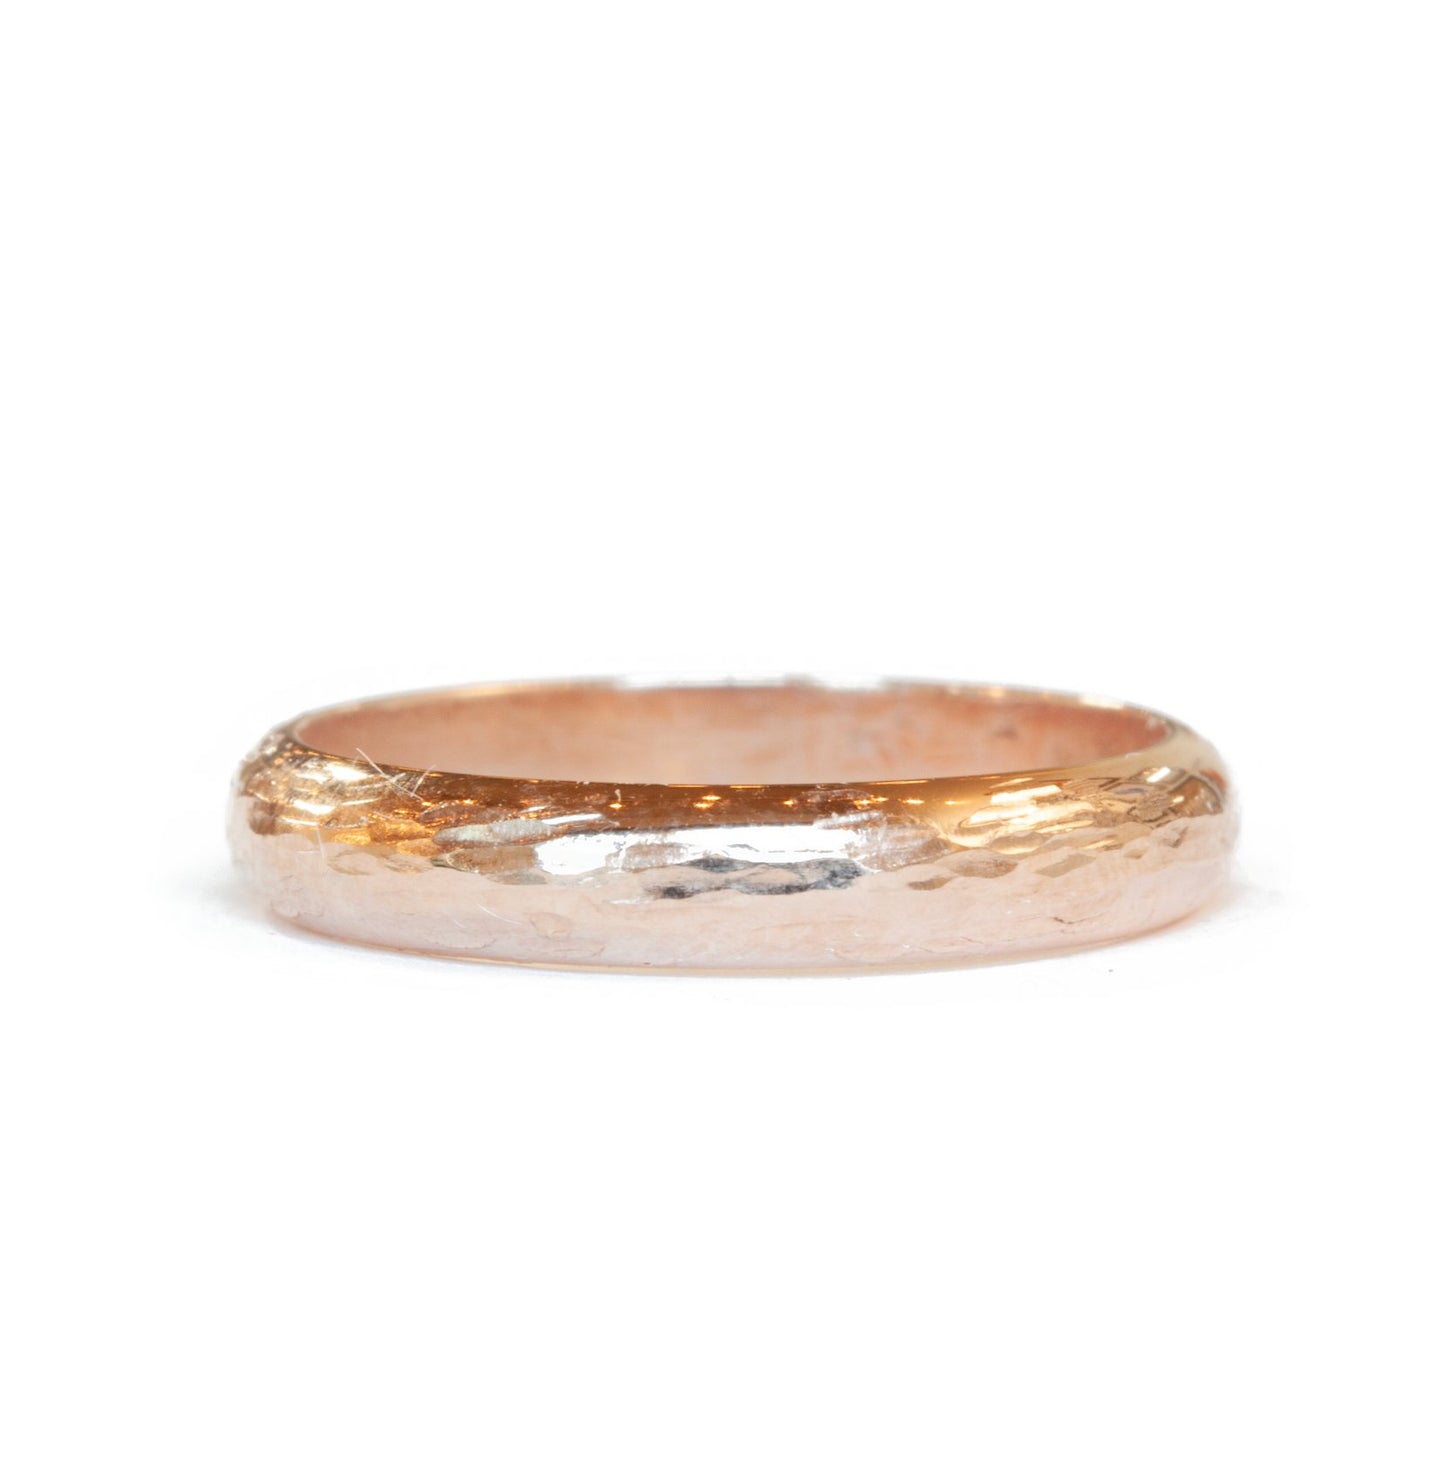 The Birch Band (Ready to ship in 3mm width 14K rose gold size 6.75) - W.R. Metalarts